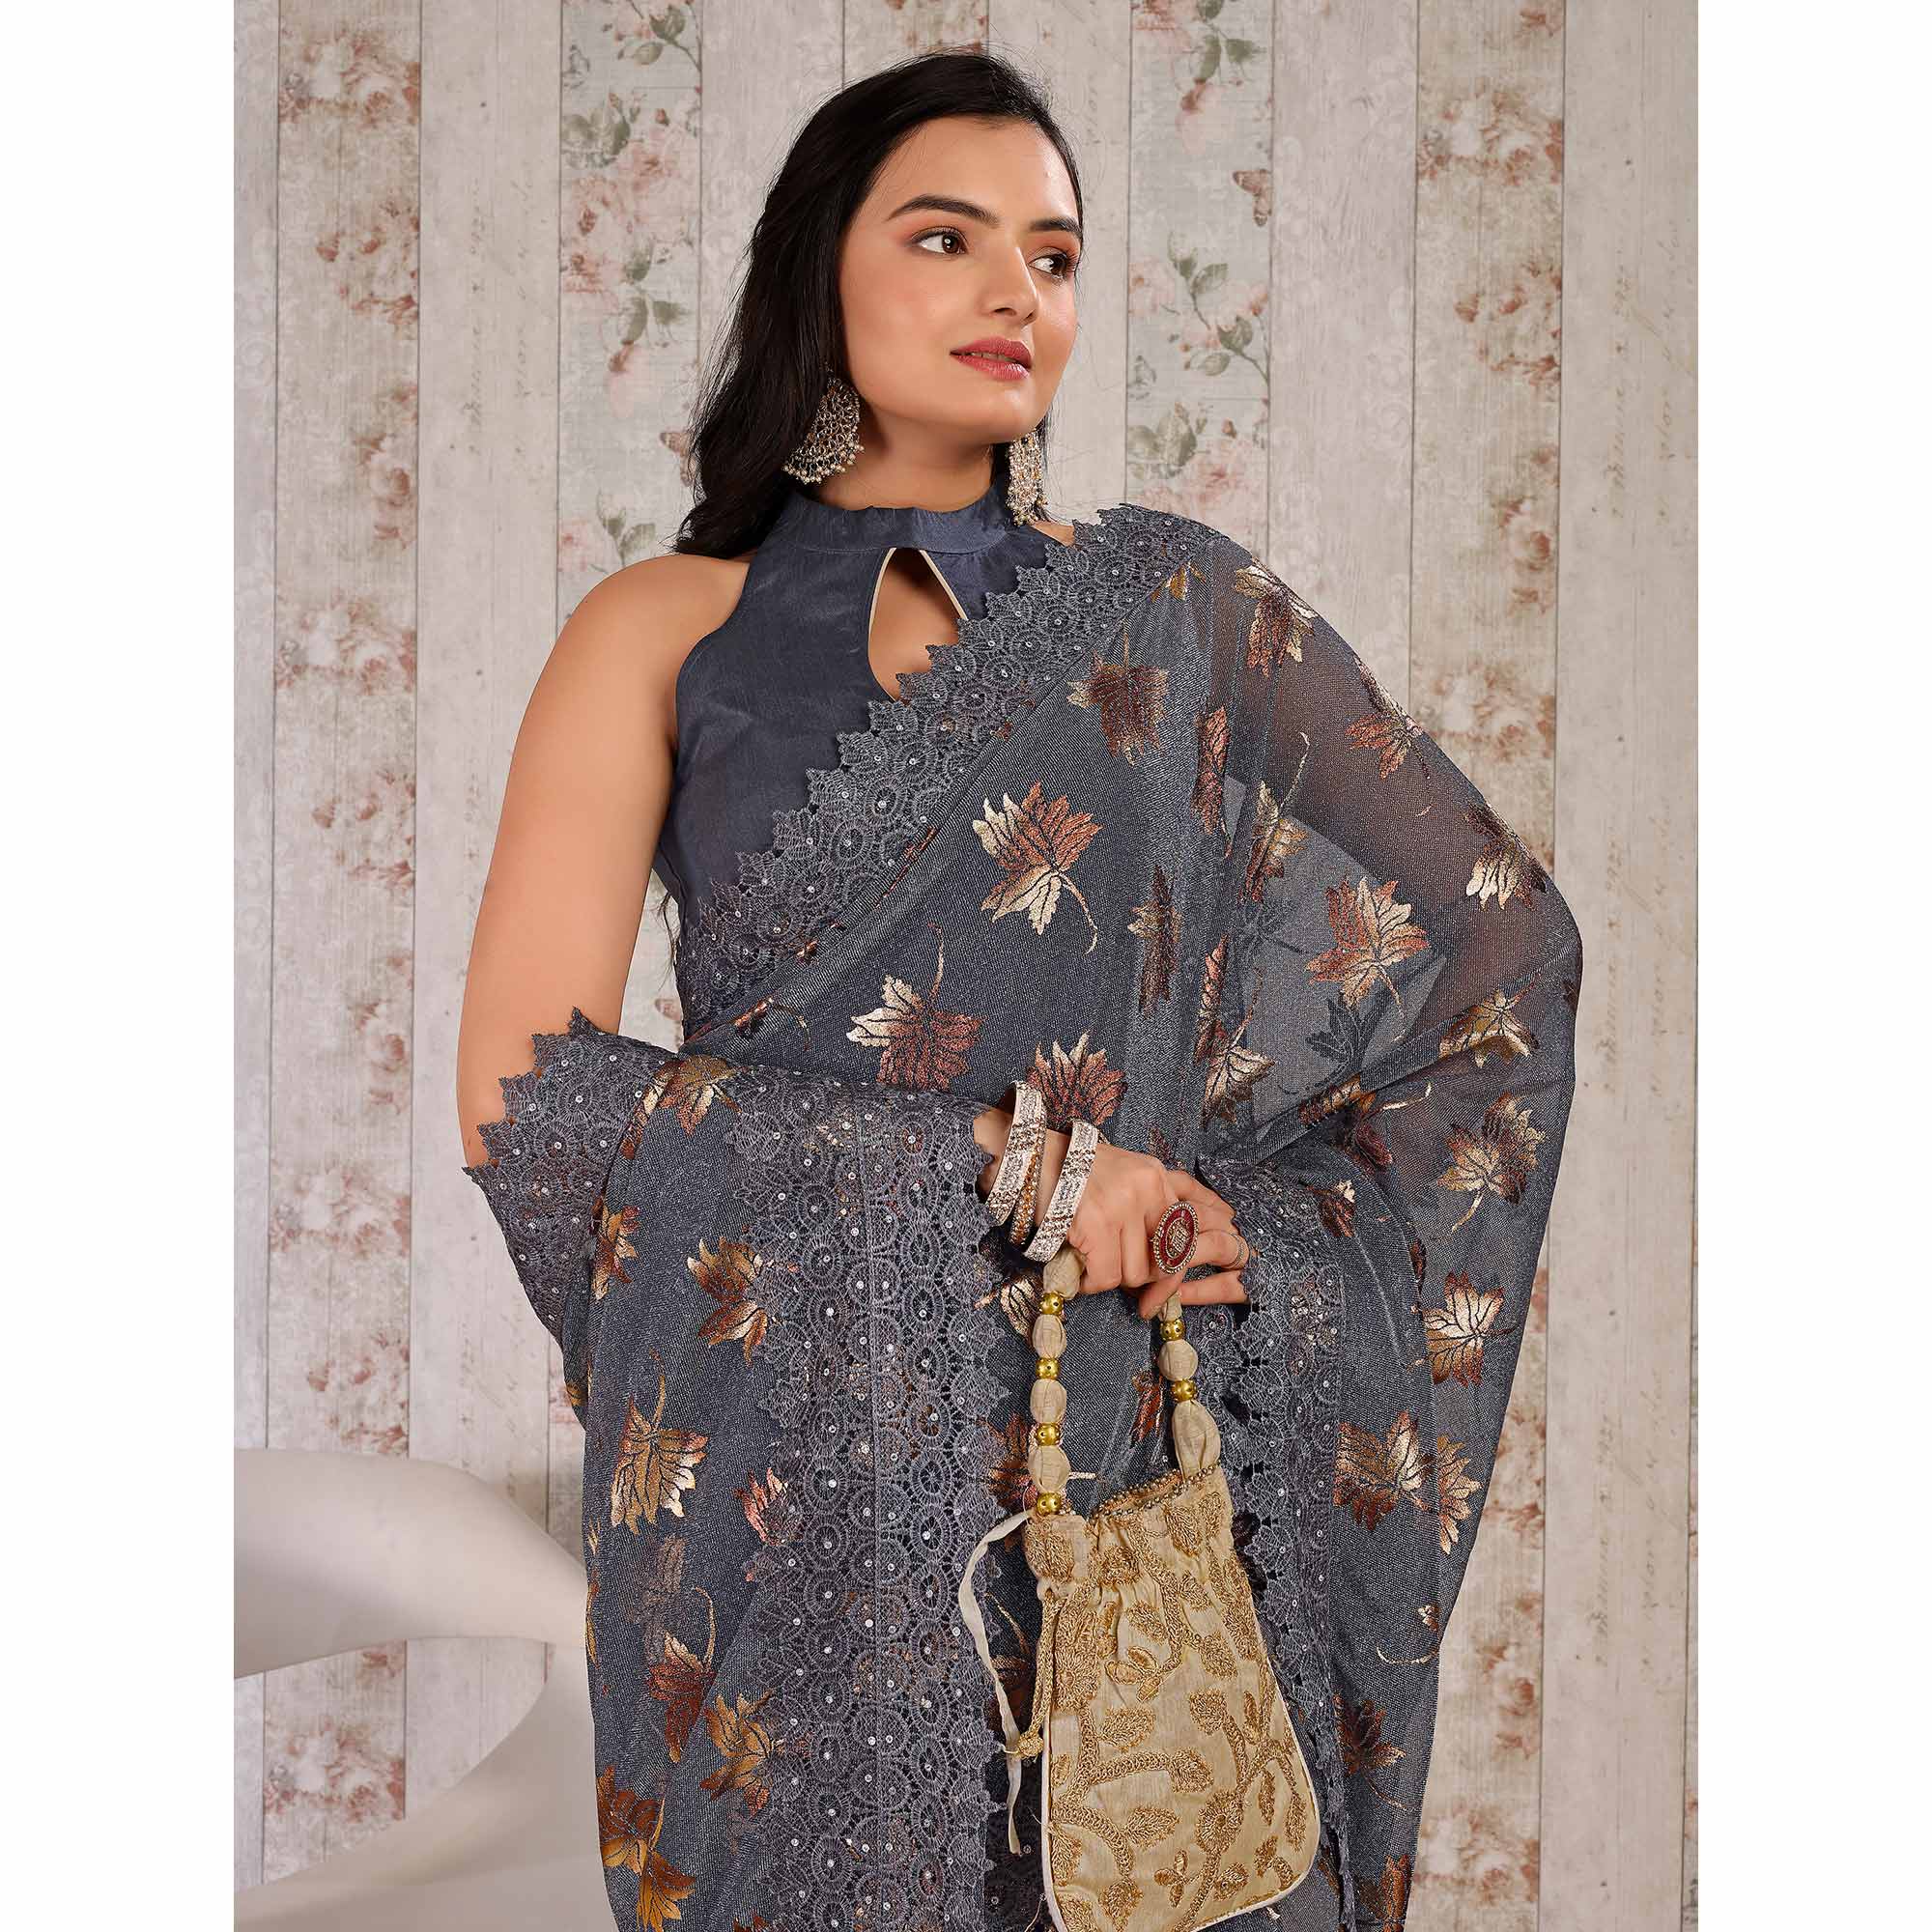 Grey Foil Printed Lycra Saree With Embroidered Lace Border